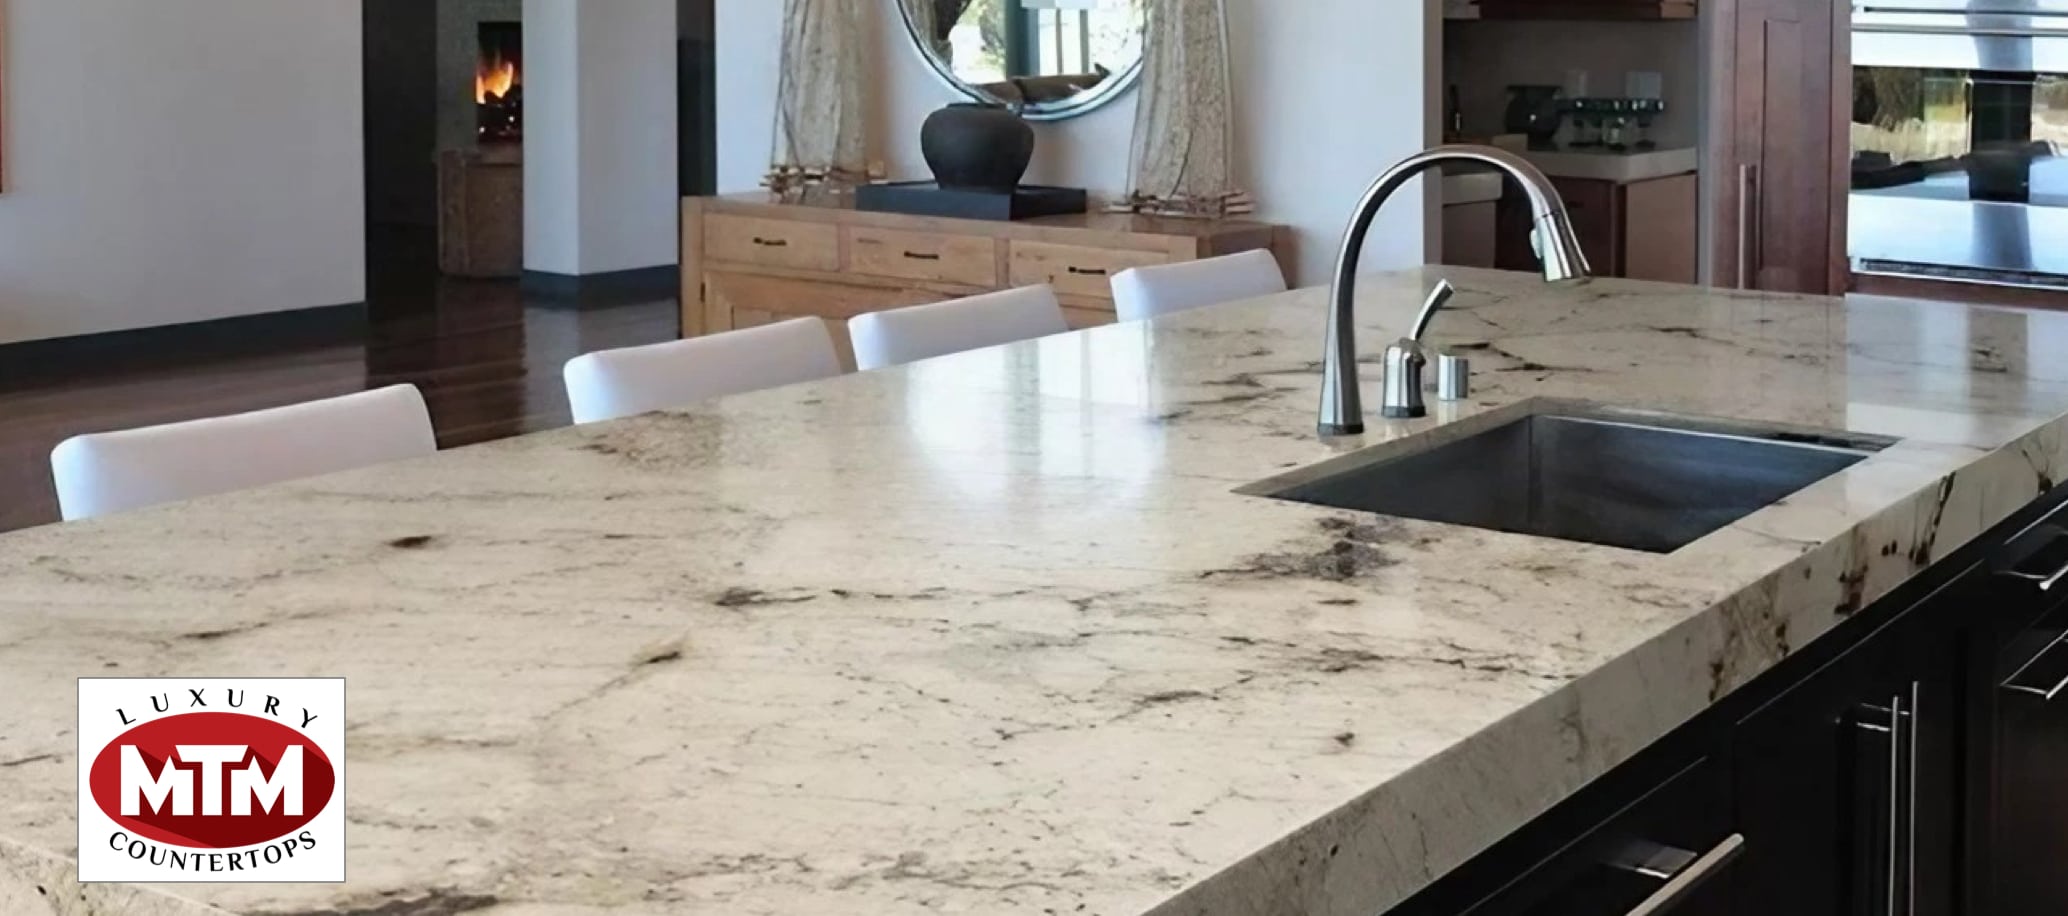 Granite countertop installation by MTM Luxury Countertops in a Colorado Springs residence, showcasing a polished surface with natural stone variations.